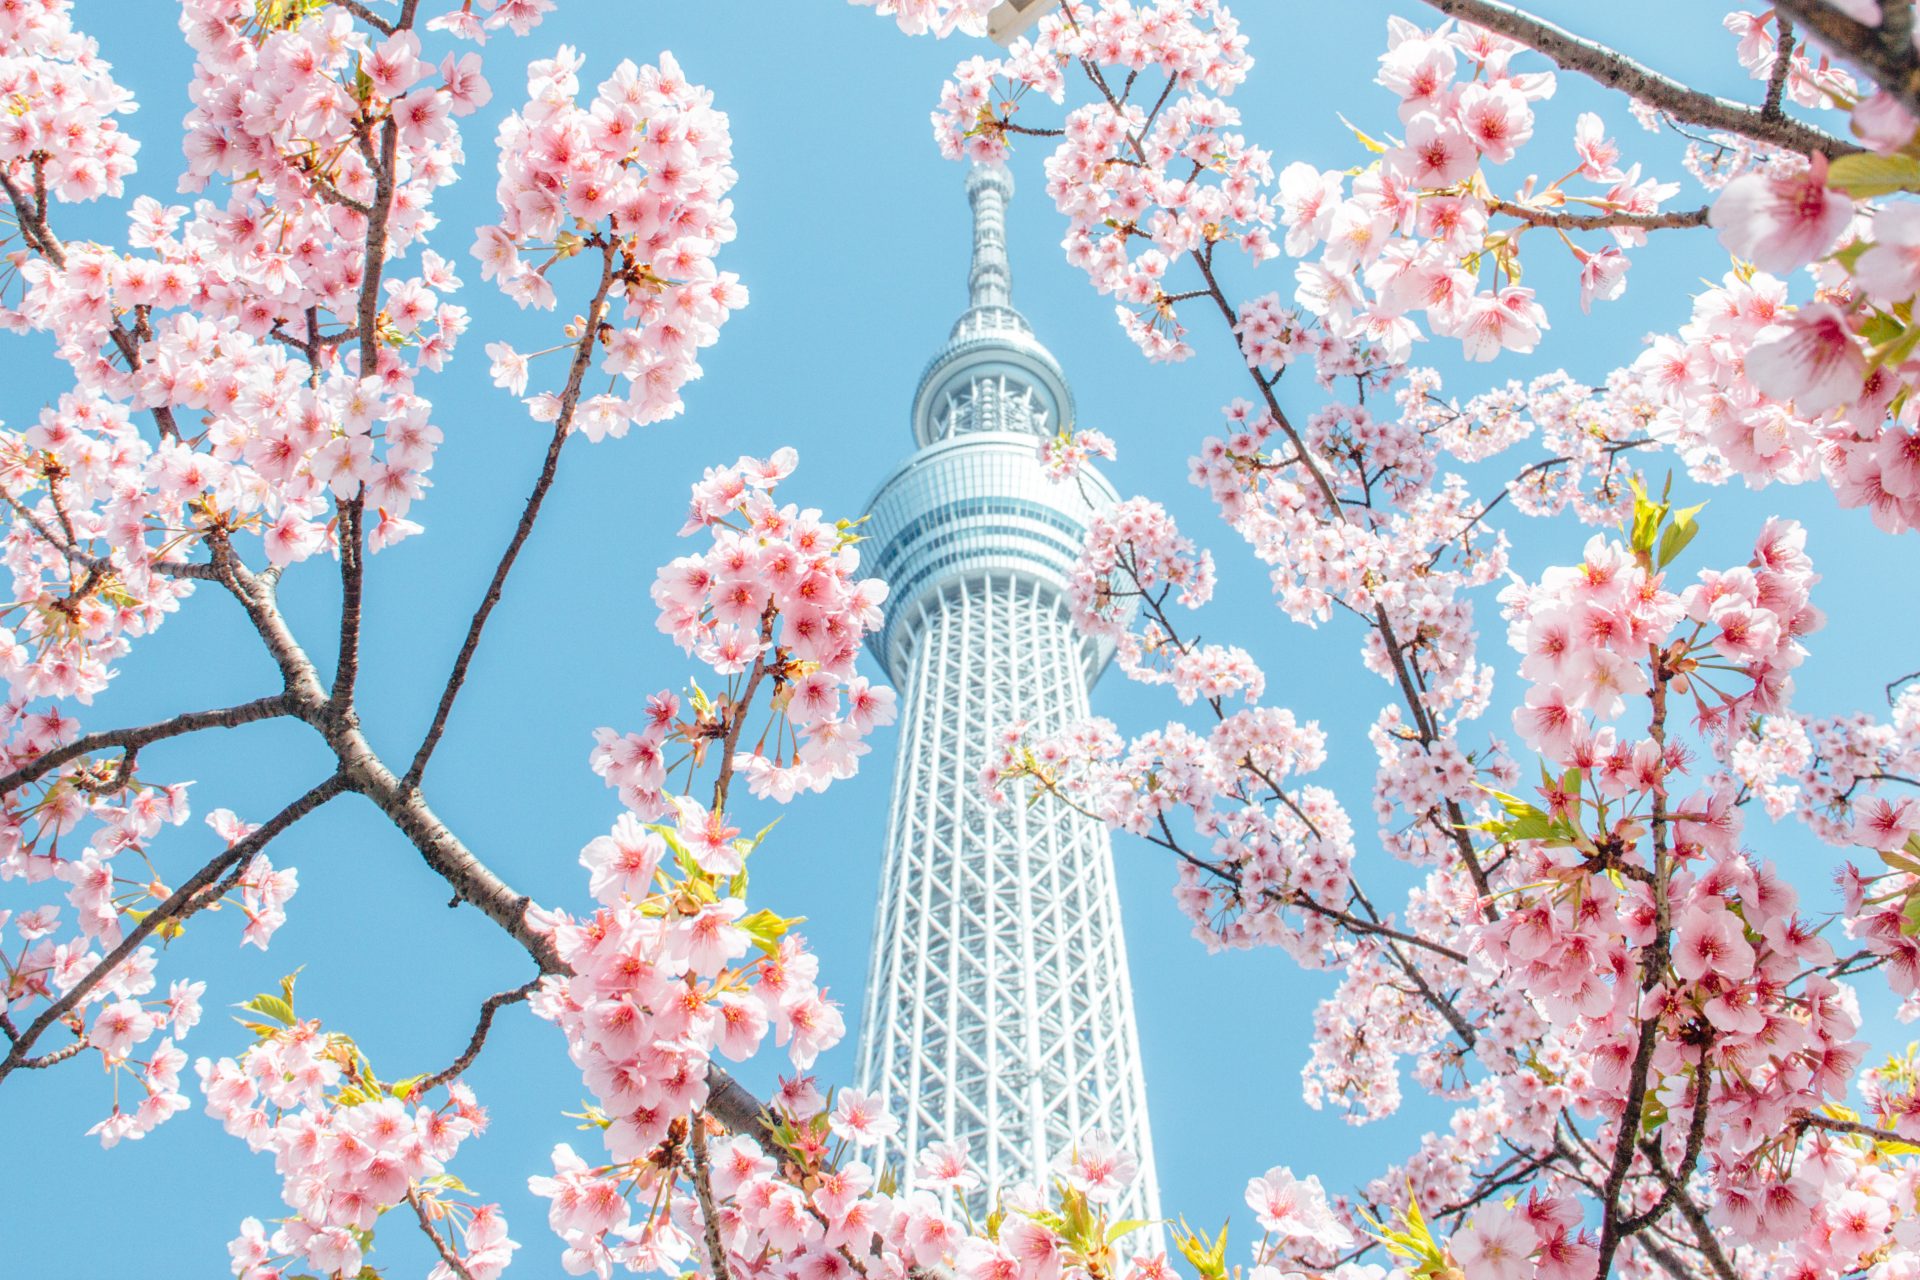 Where to see the most beautiful cherry blossoms in Japan